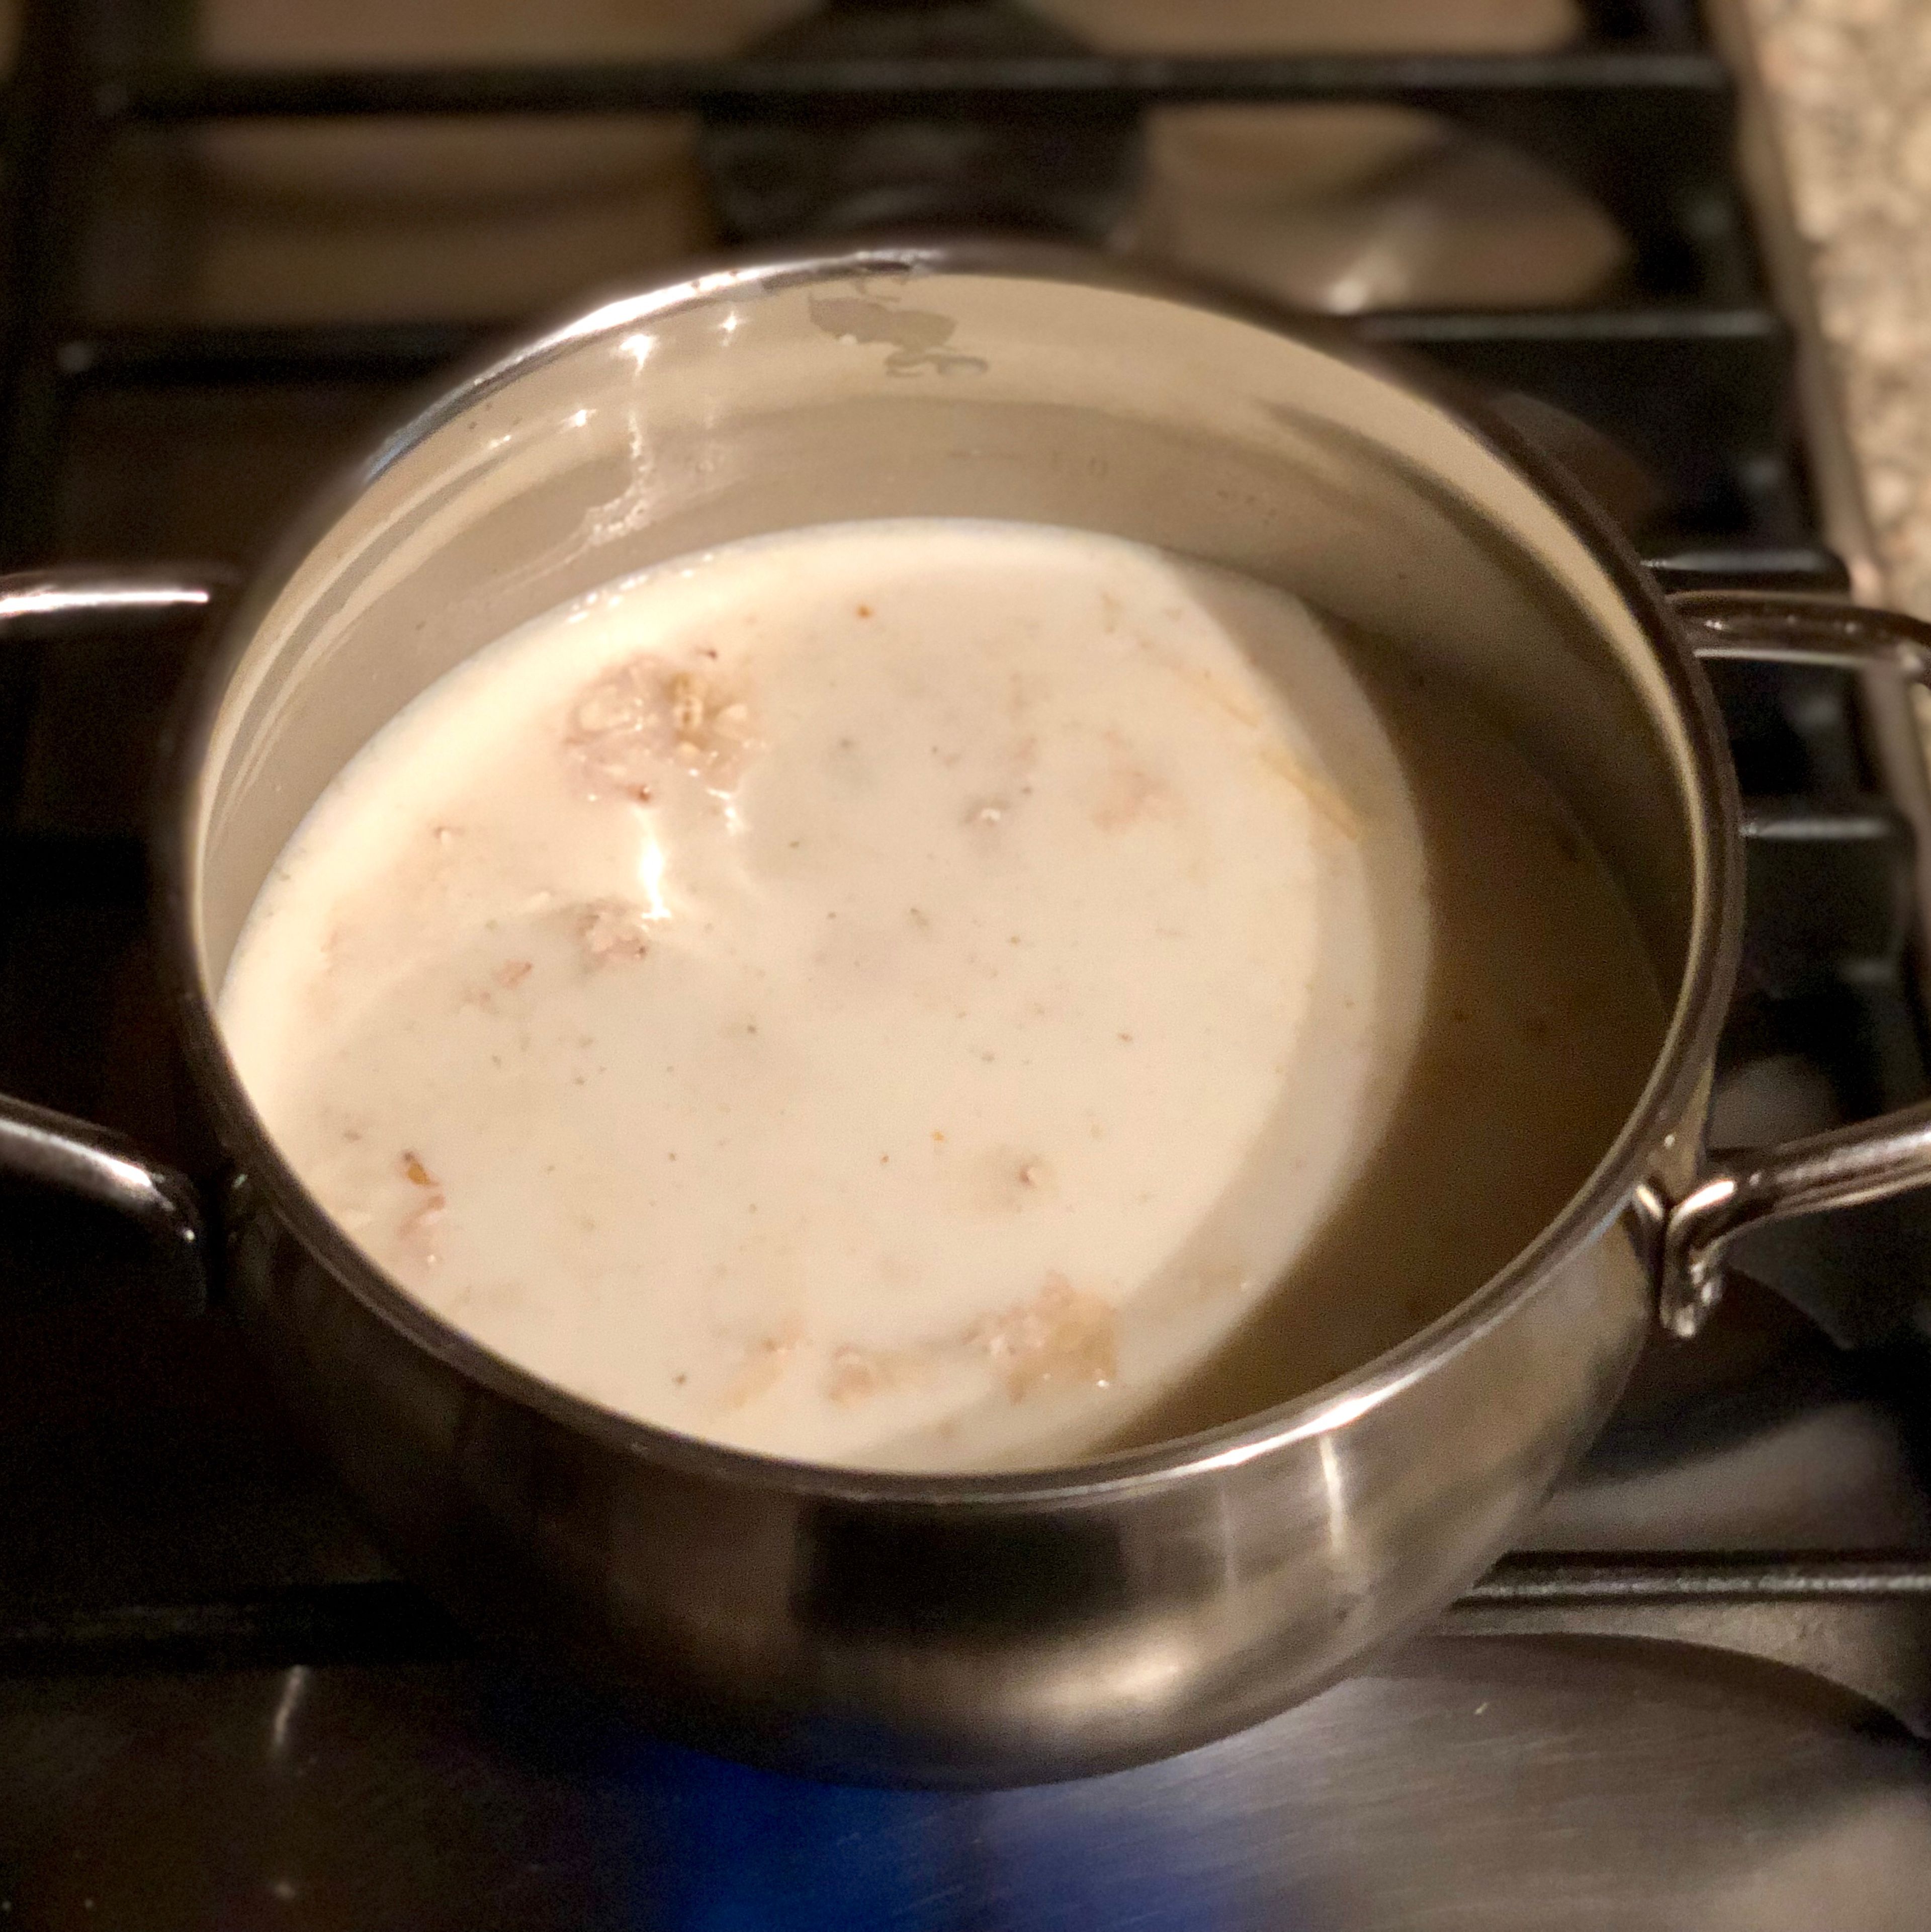 Combine oats, almond milk, already mashed banana, salt and vanilla extract in a small pot and cook on a medium/high heat, stirring occasionally. 5-7 minutes. Garnish with your favorite berries/nuts and enjoy.